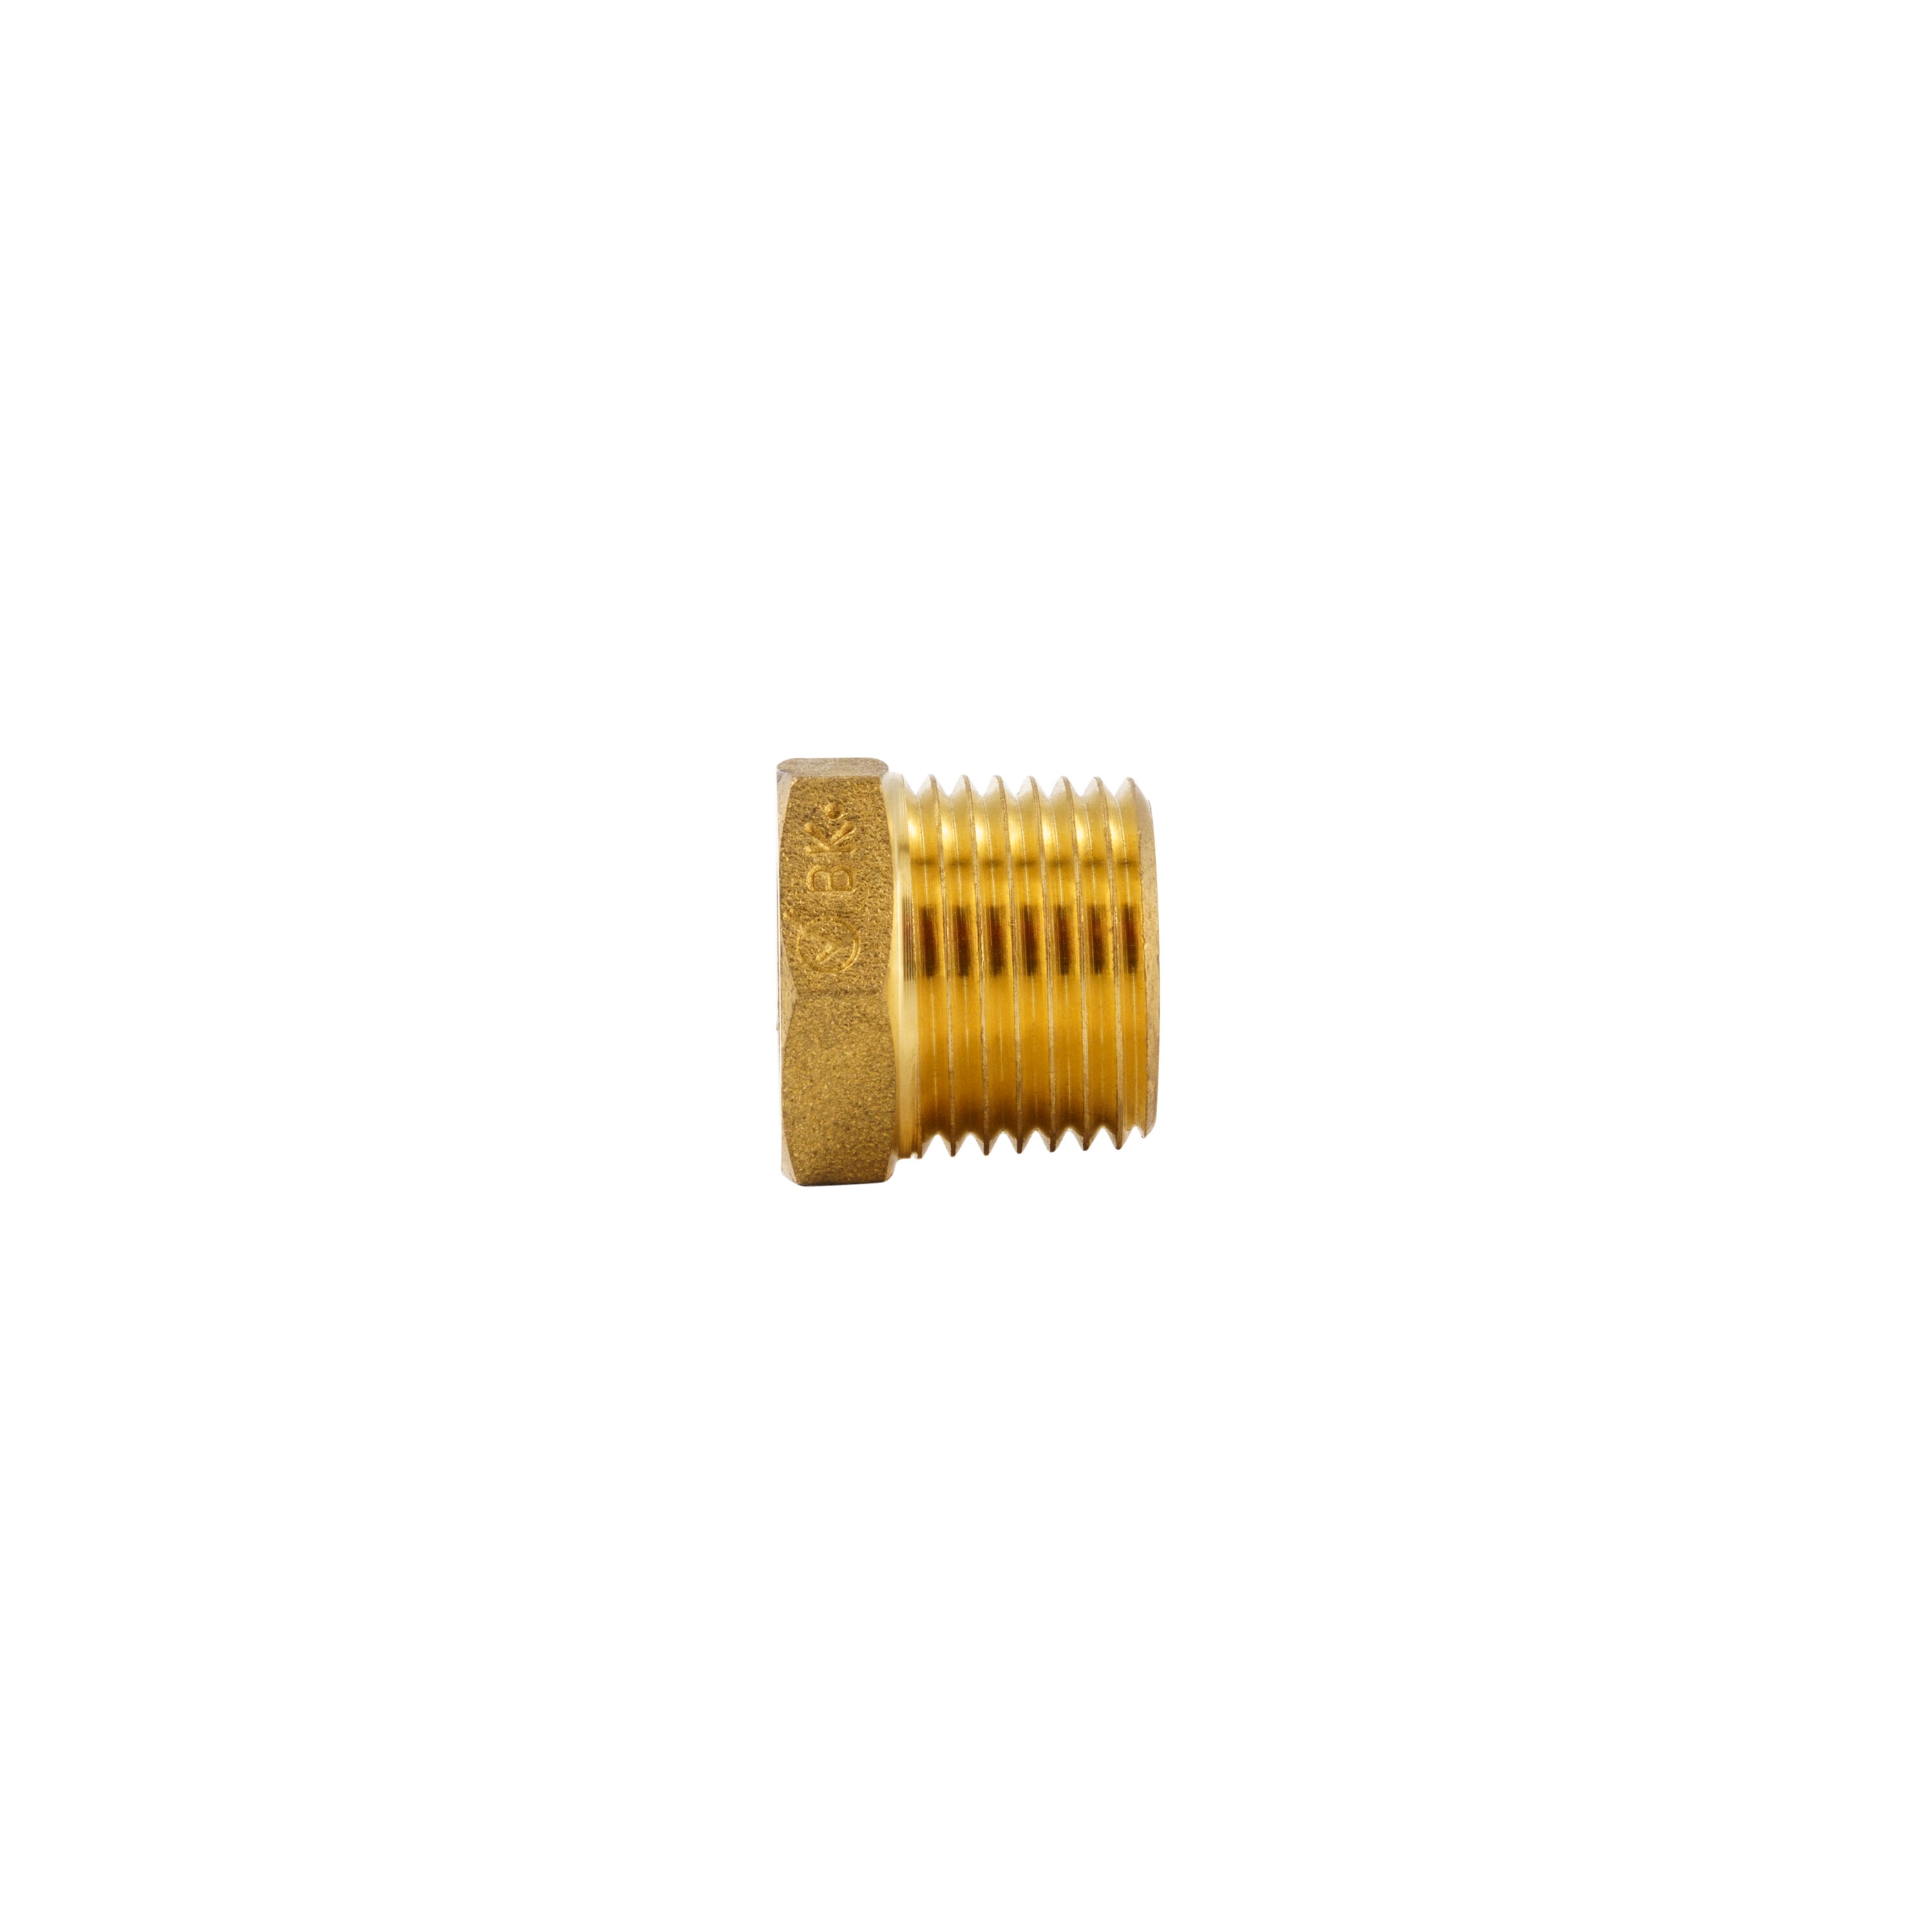 Proline Series 1/8-in X 1/2-in Threaded Male Adapter, 47% OFF